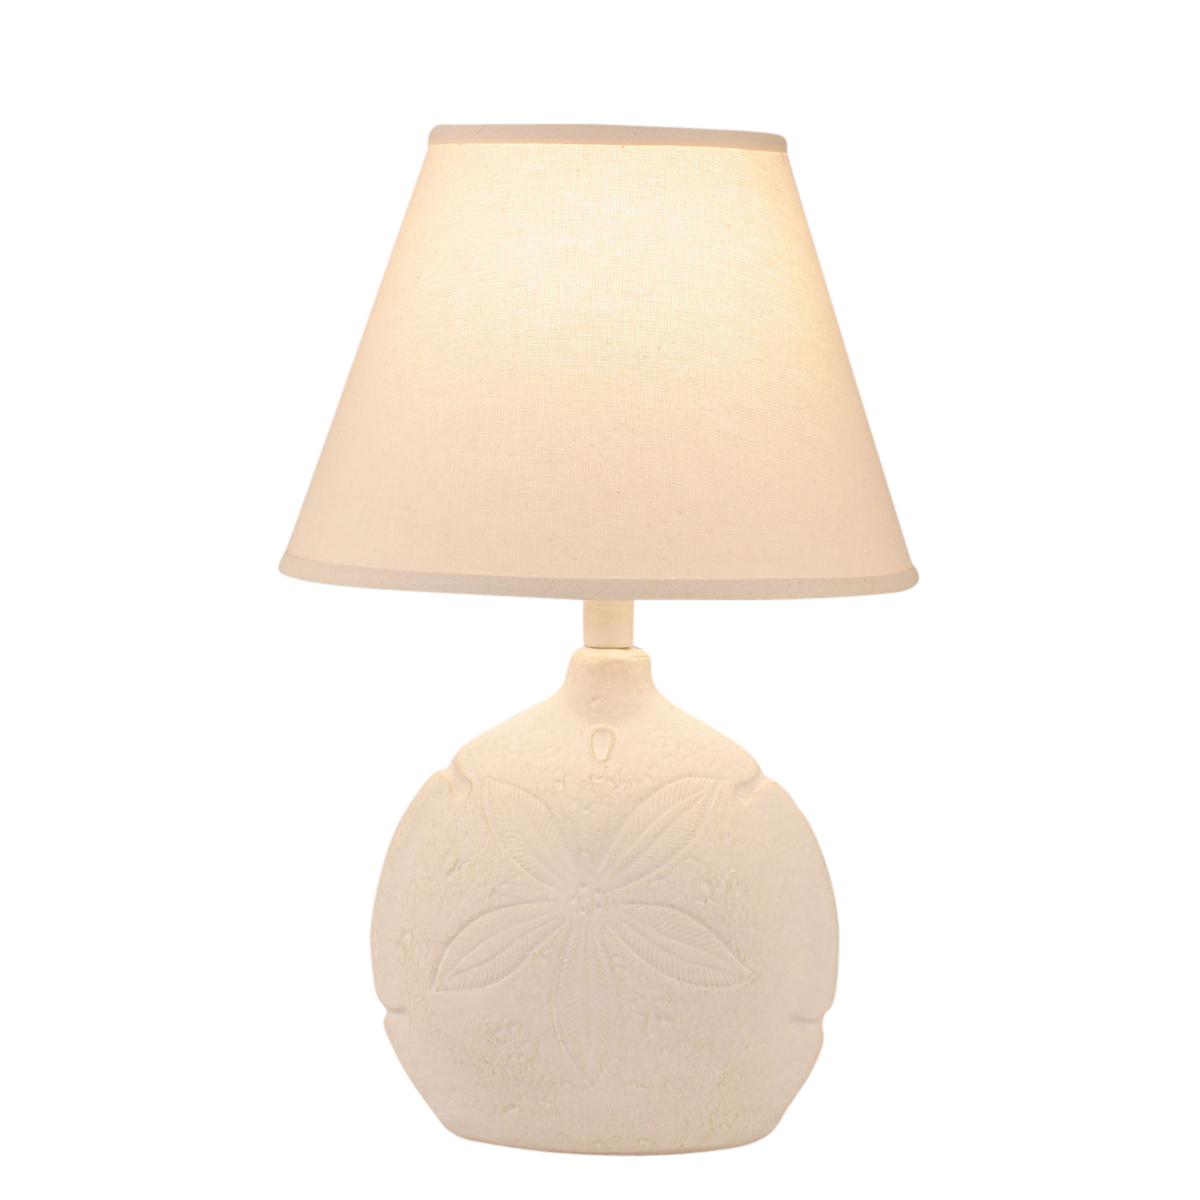 beach table lamps two tone sand dollar accent lamp bella tabletop decorative accessories console old round oak white metal side drawer end black bathroom decor outdoor dining sets